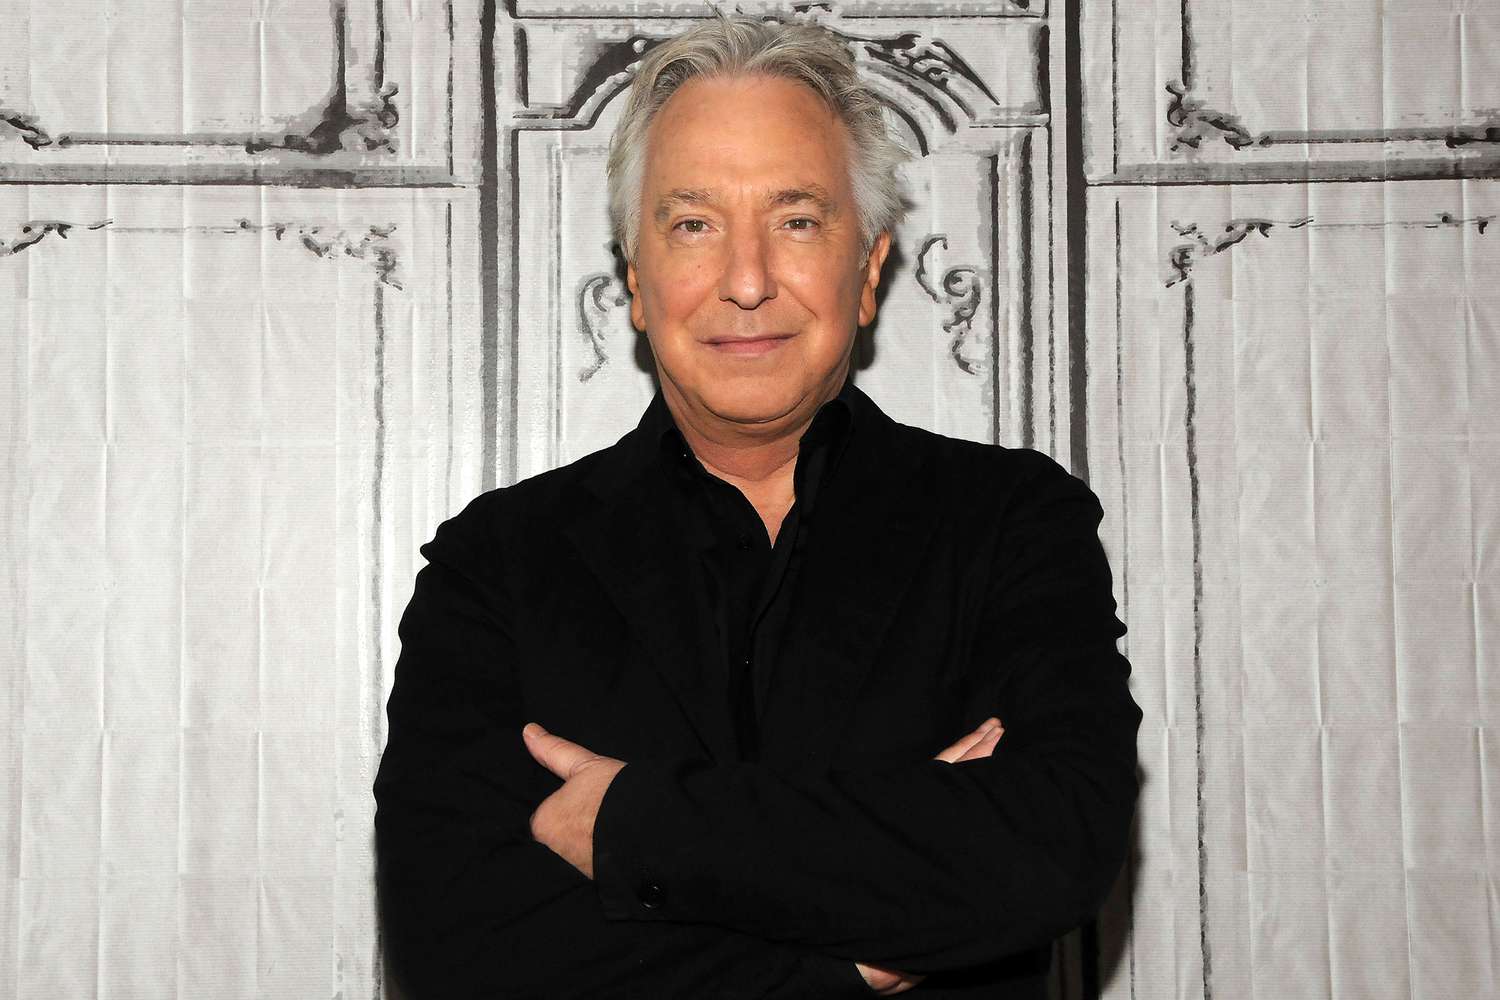 Alan Rickman’s journals recount decision to stay in Harry Potter films